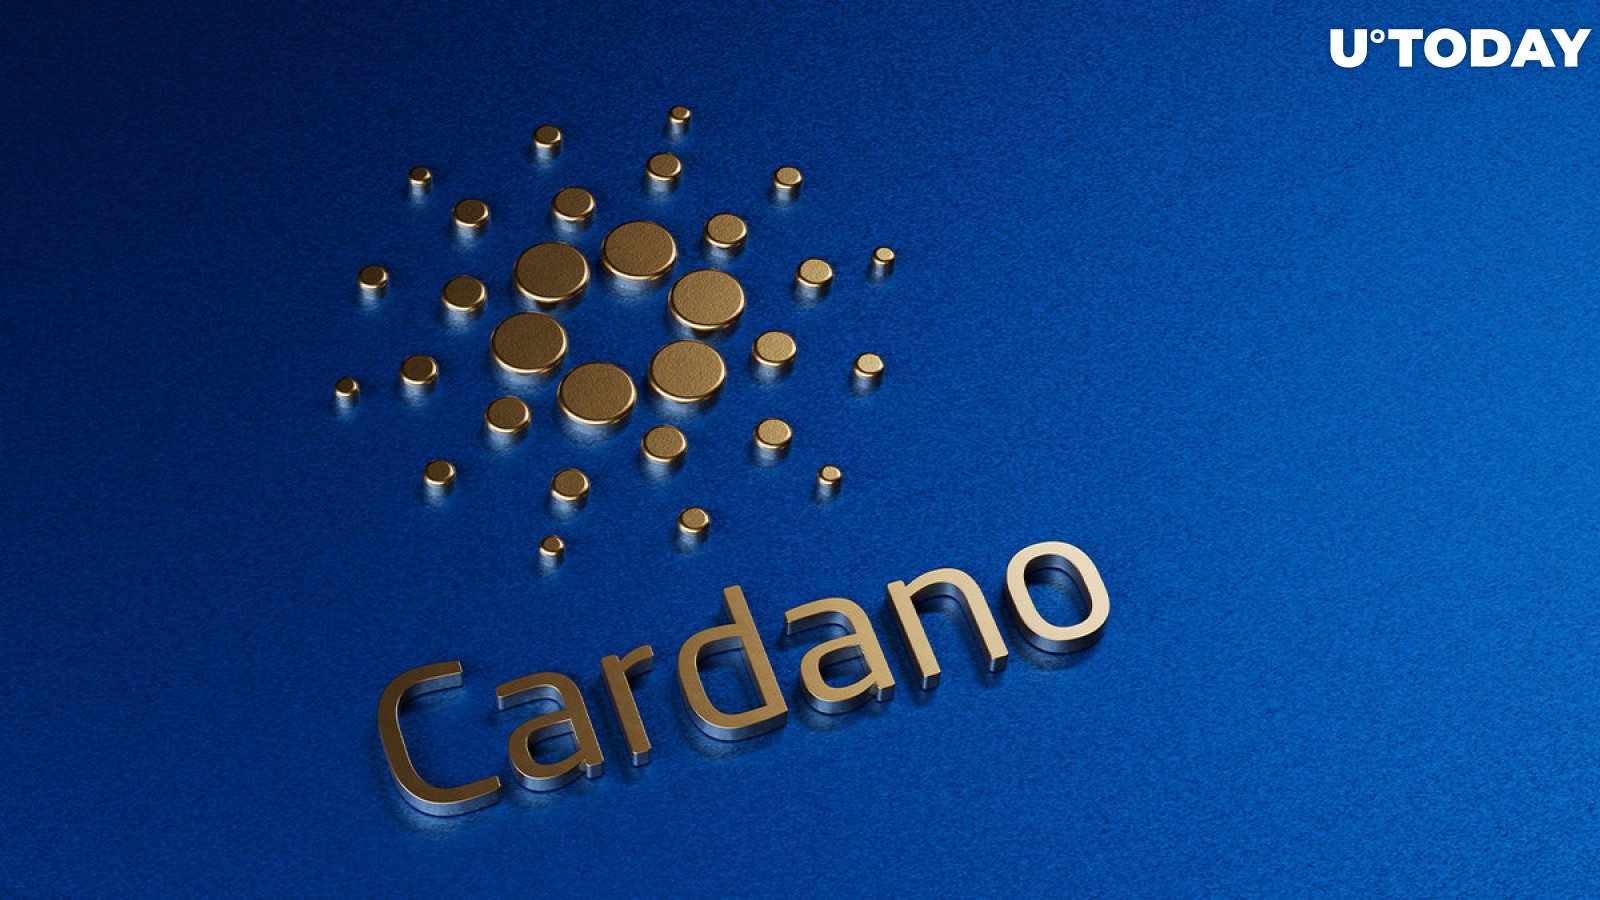 Cardano Network TVL up Almost 150% Following Surge of DeFi